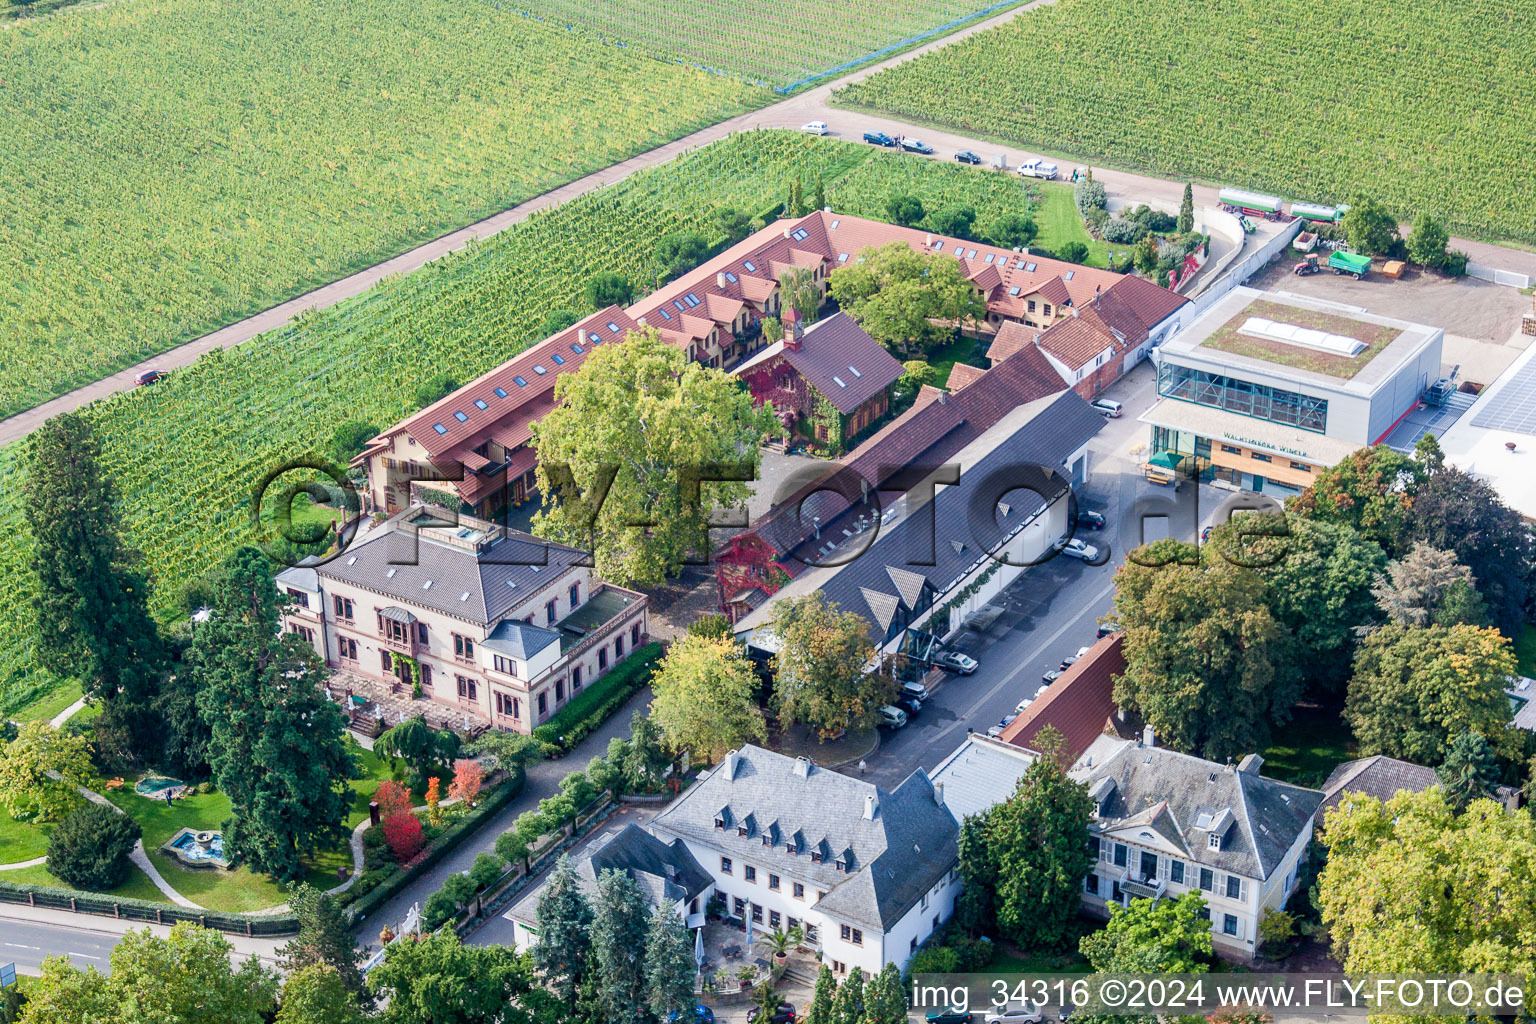 Aerial photograpy of Buildings and parks at the mansion of the wine cellar Weingut Dr. Buerklin-Wolf in Wachenheim an der Weinstrasse in the state Rhineland-Palatinate, Germany